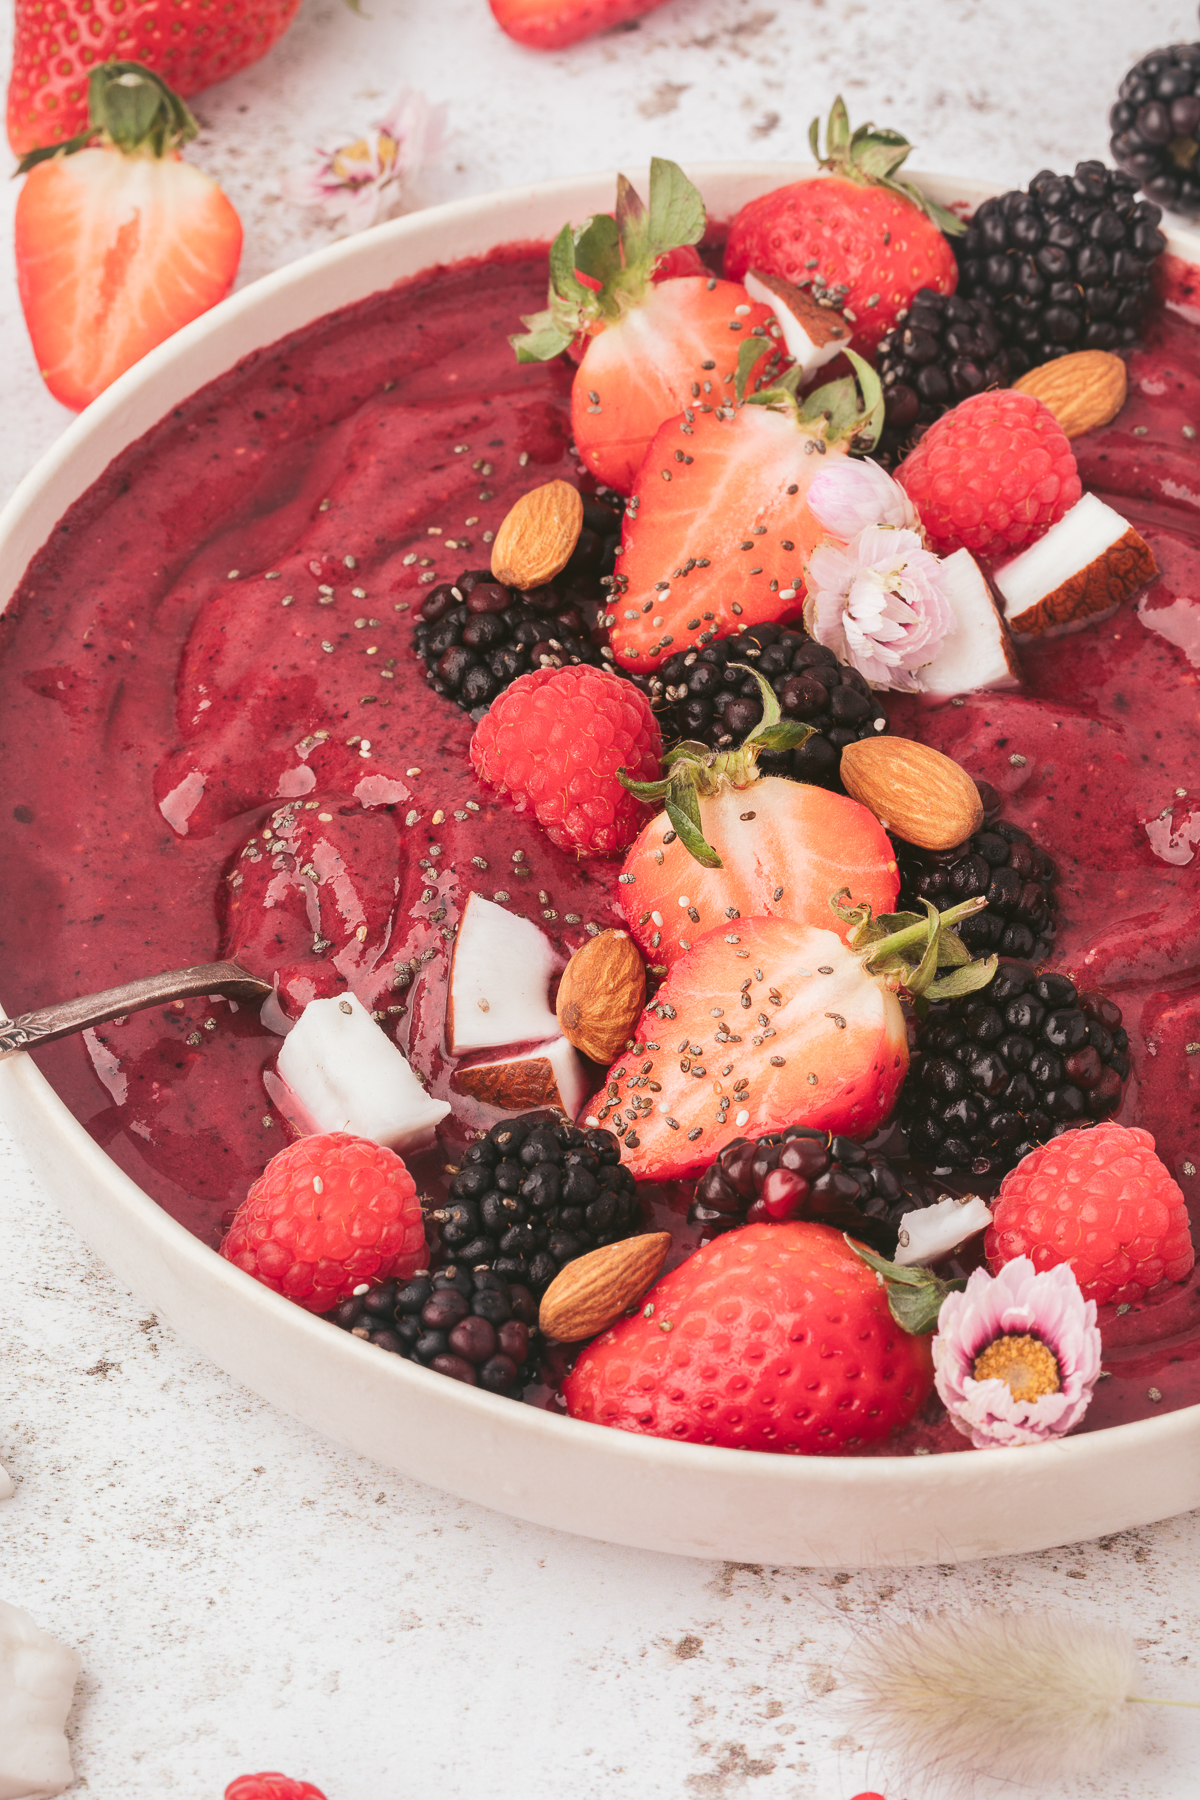 Berry Smoothie Bowl topped with fresh berries, coconut, almonds, and chia seeds